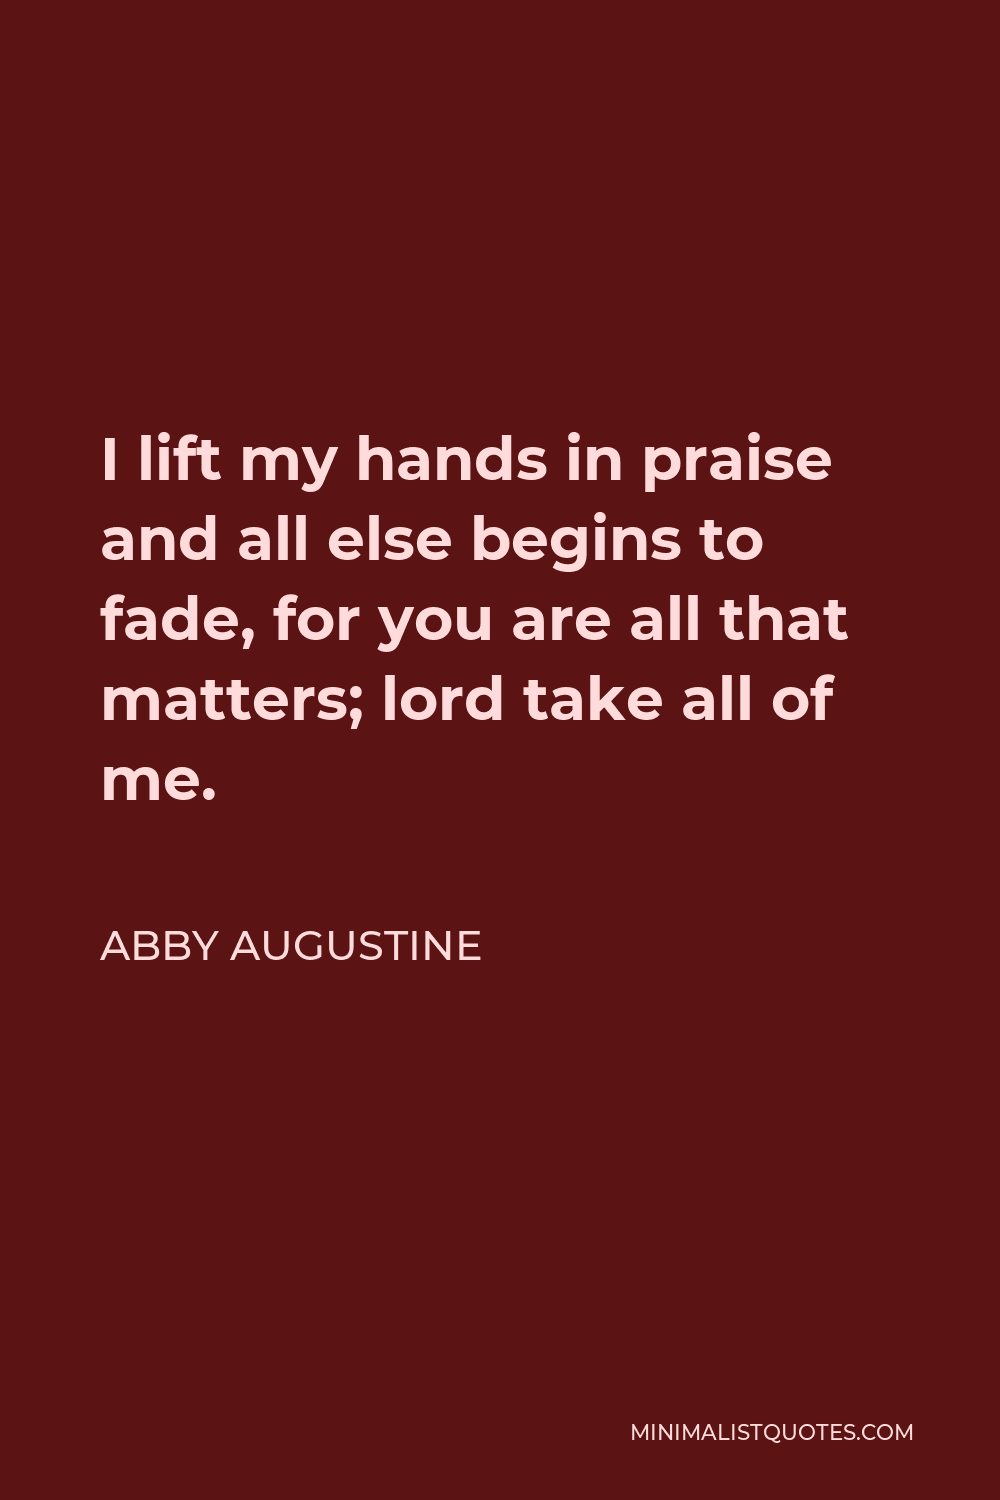 Abby Augustine Quote - I lift my hands in praise and all else begins to fade, for you are all that matters; lord take all of me.